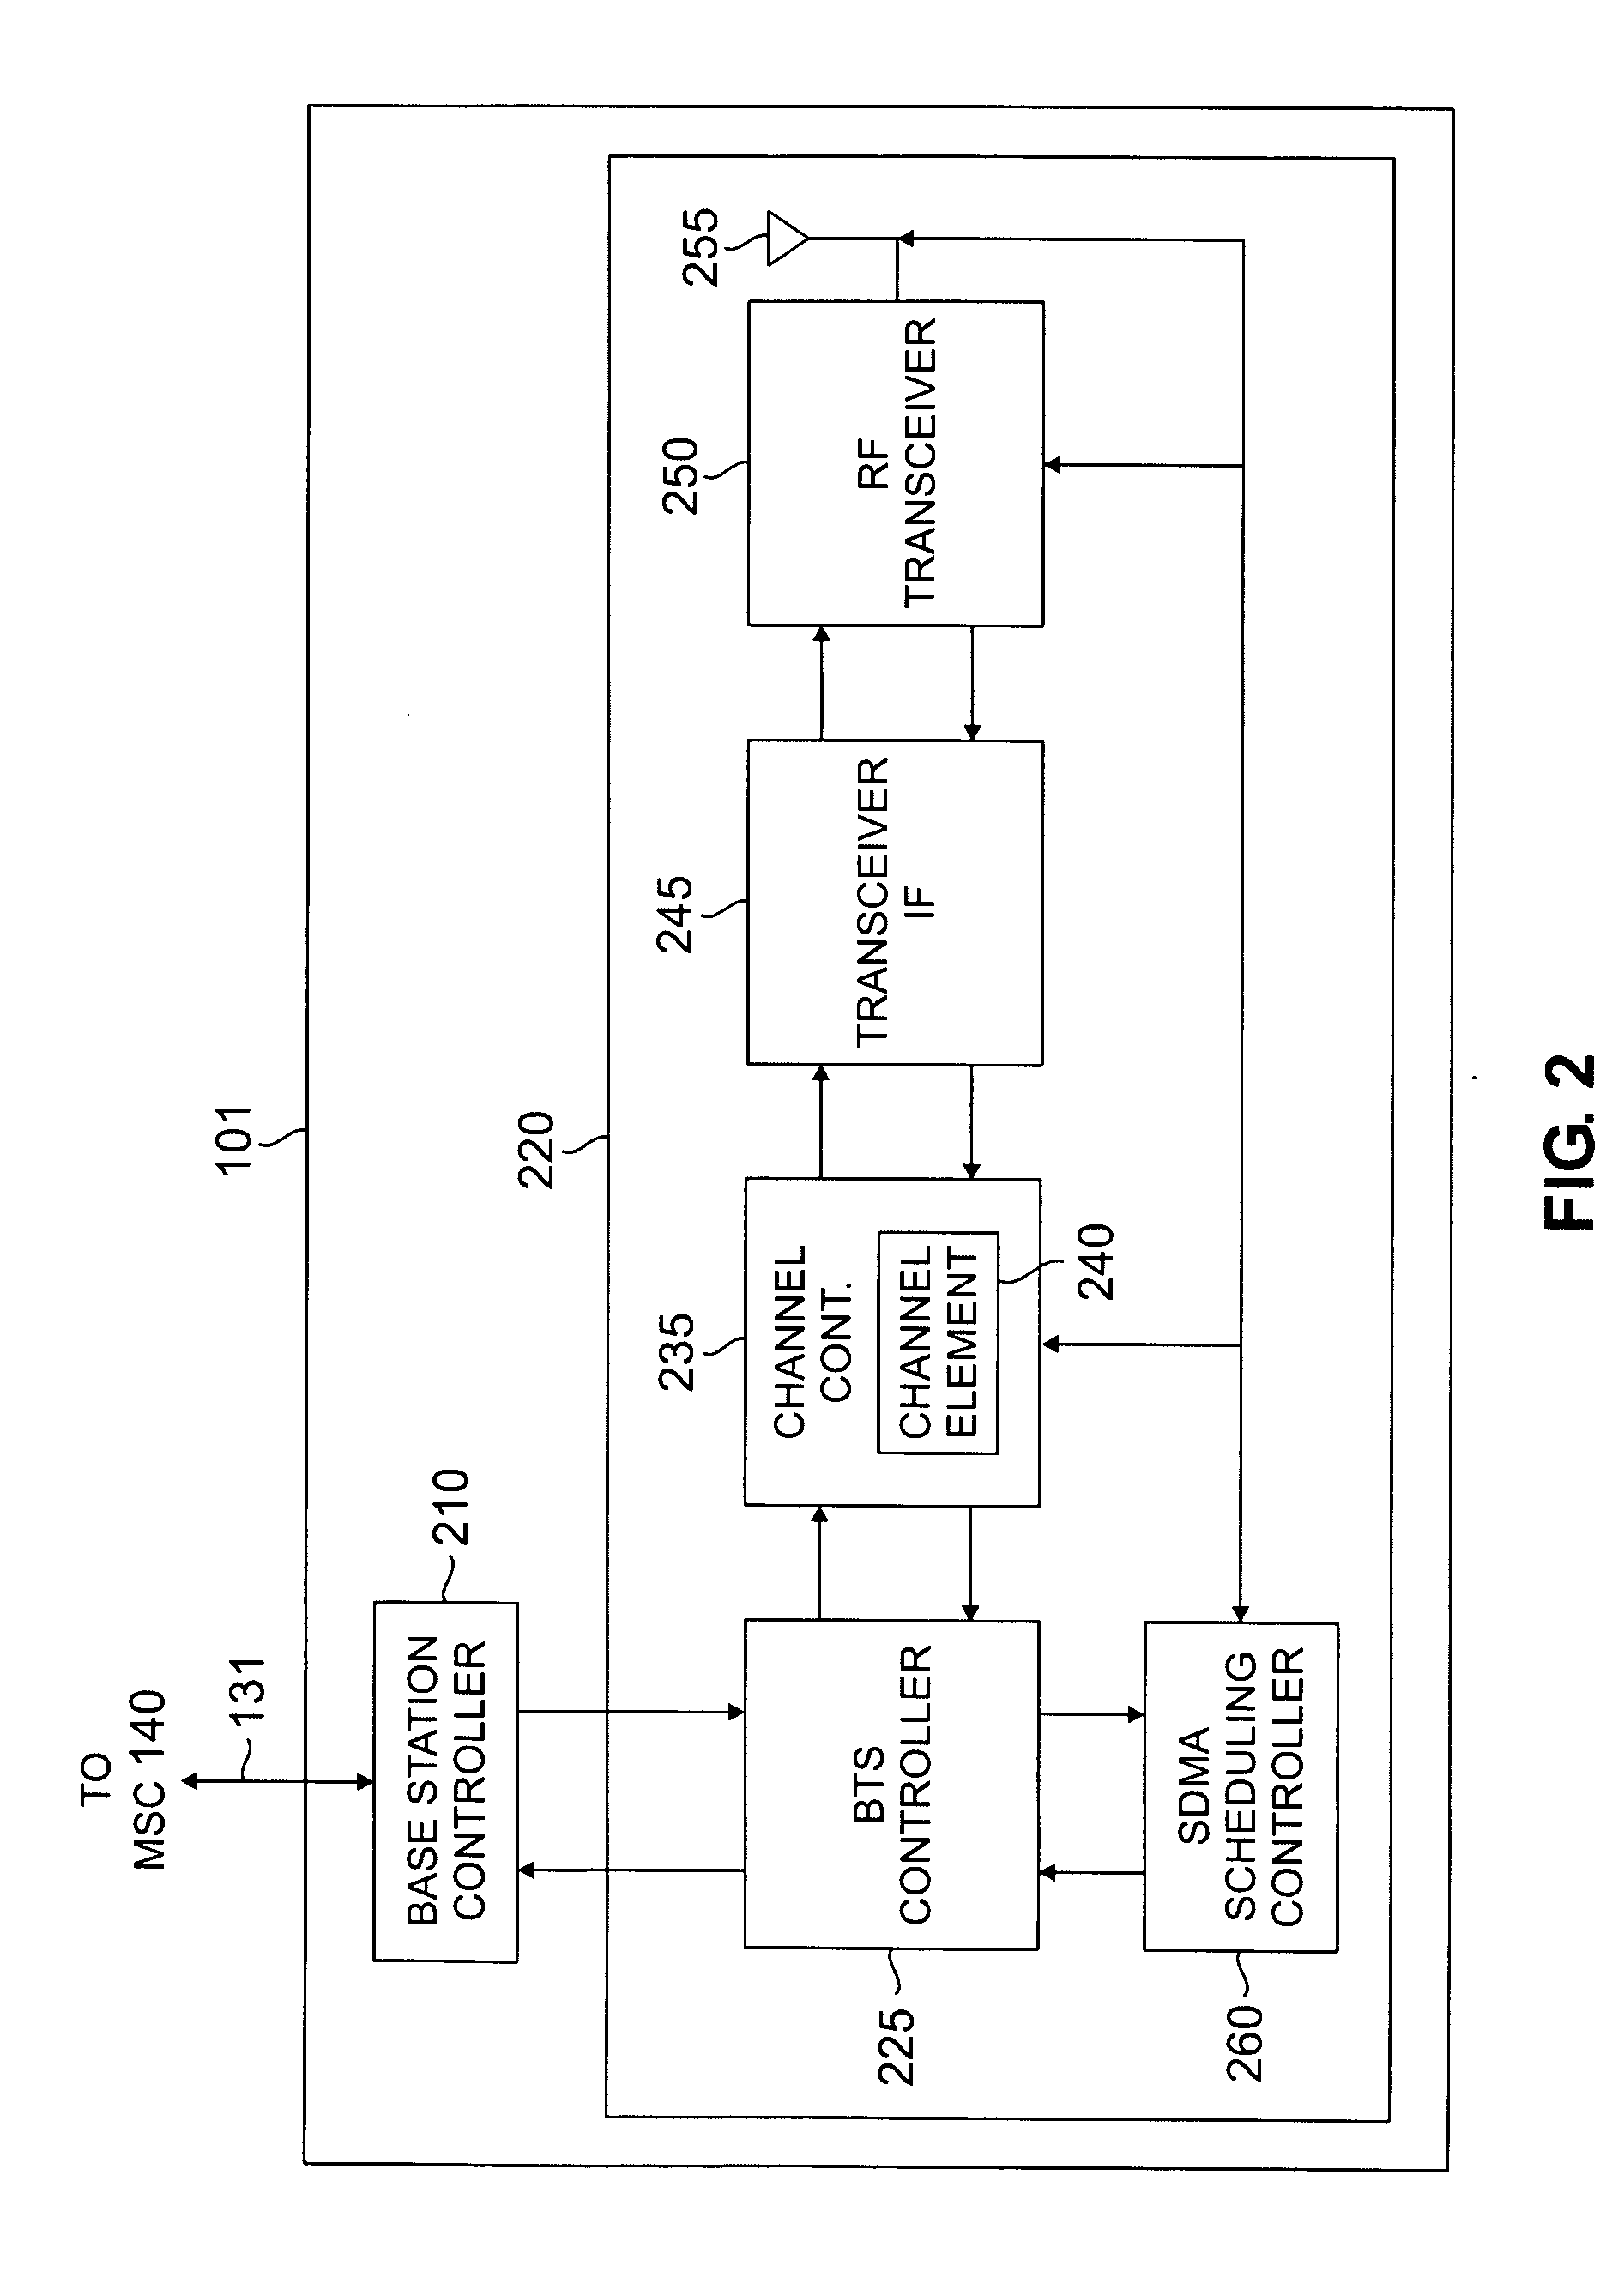 Apparatus and method for downlink spatial division multiple access scheduling in a wireless network